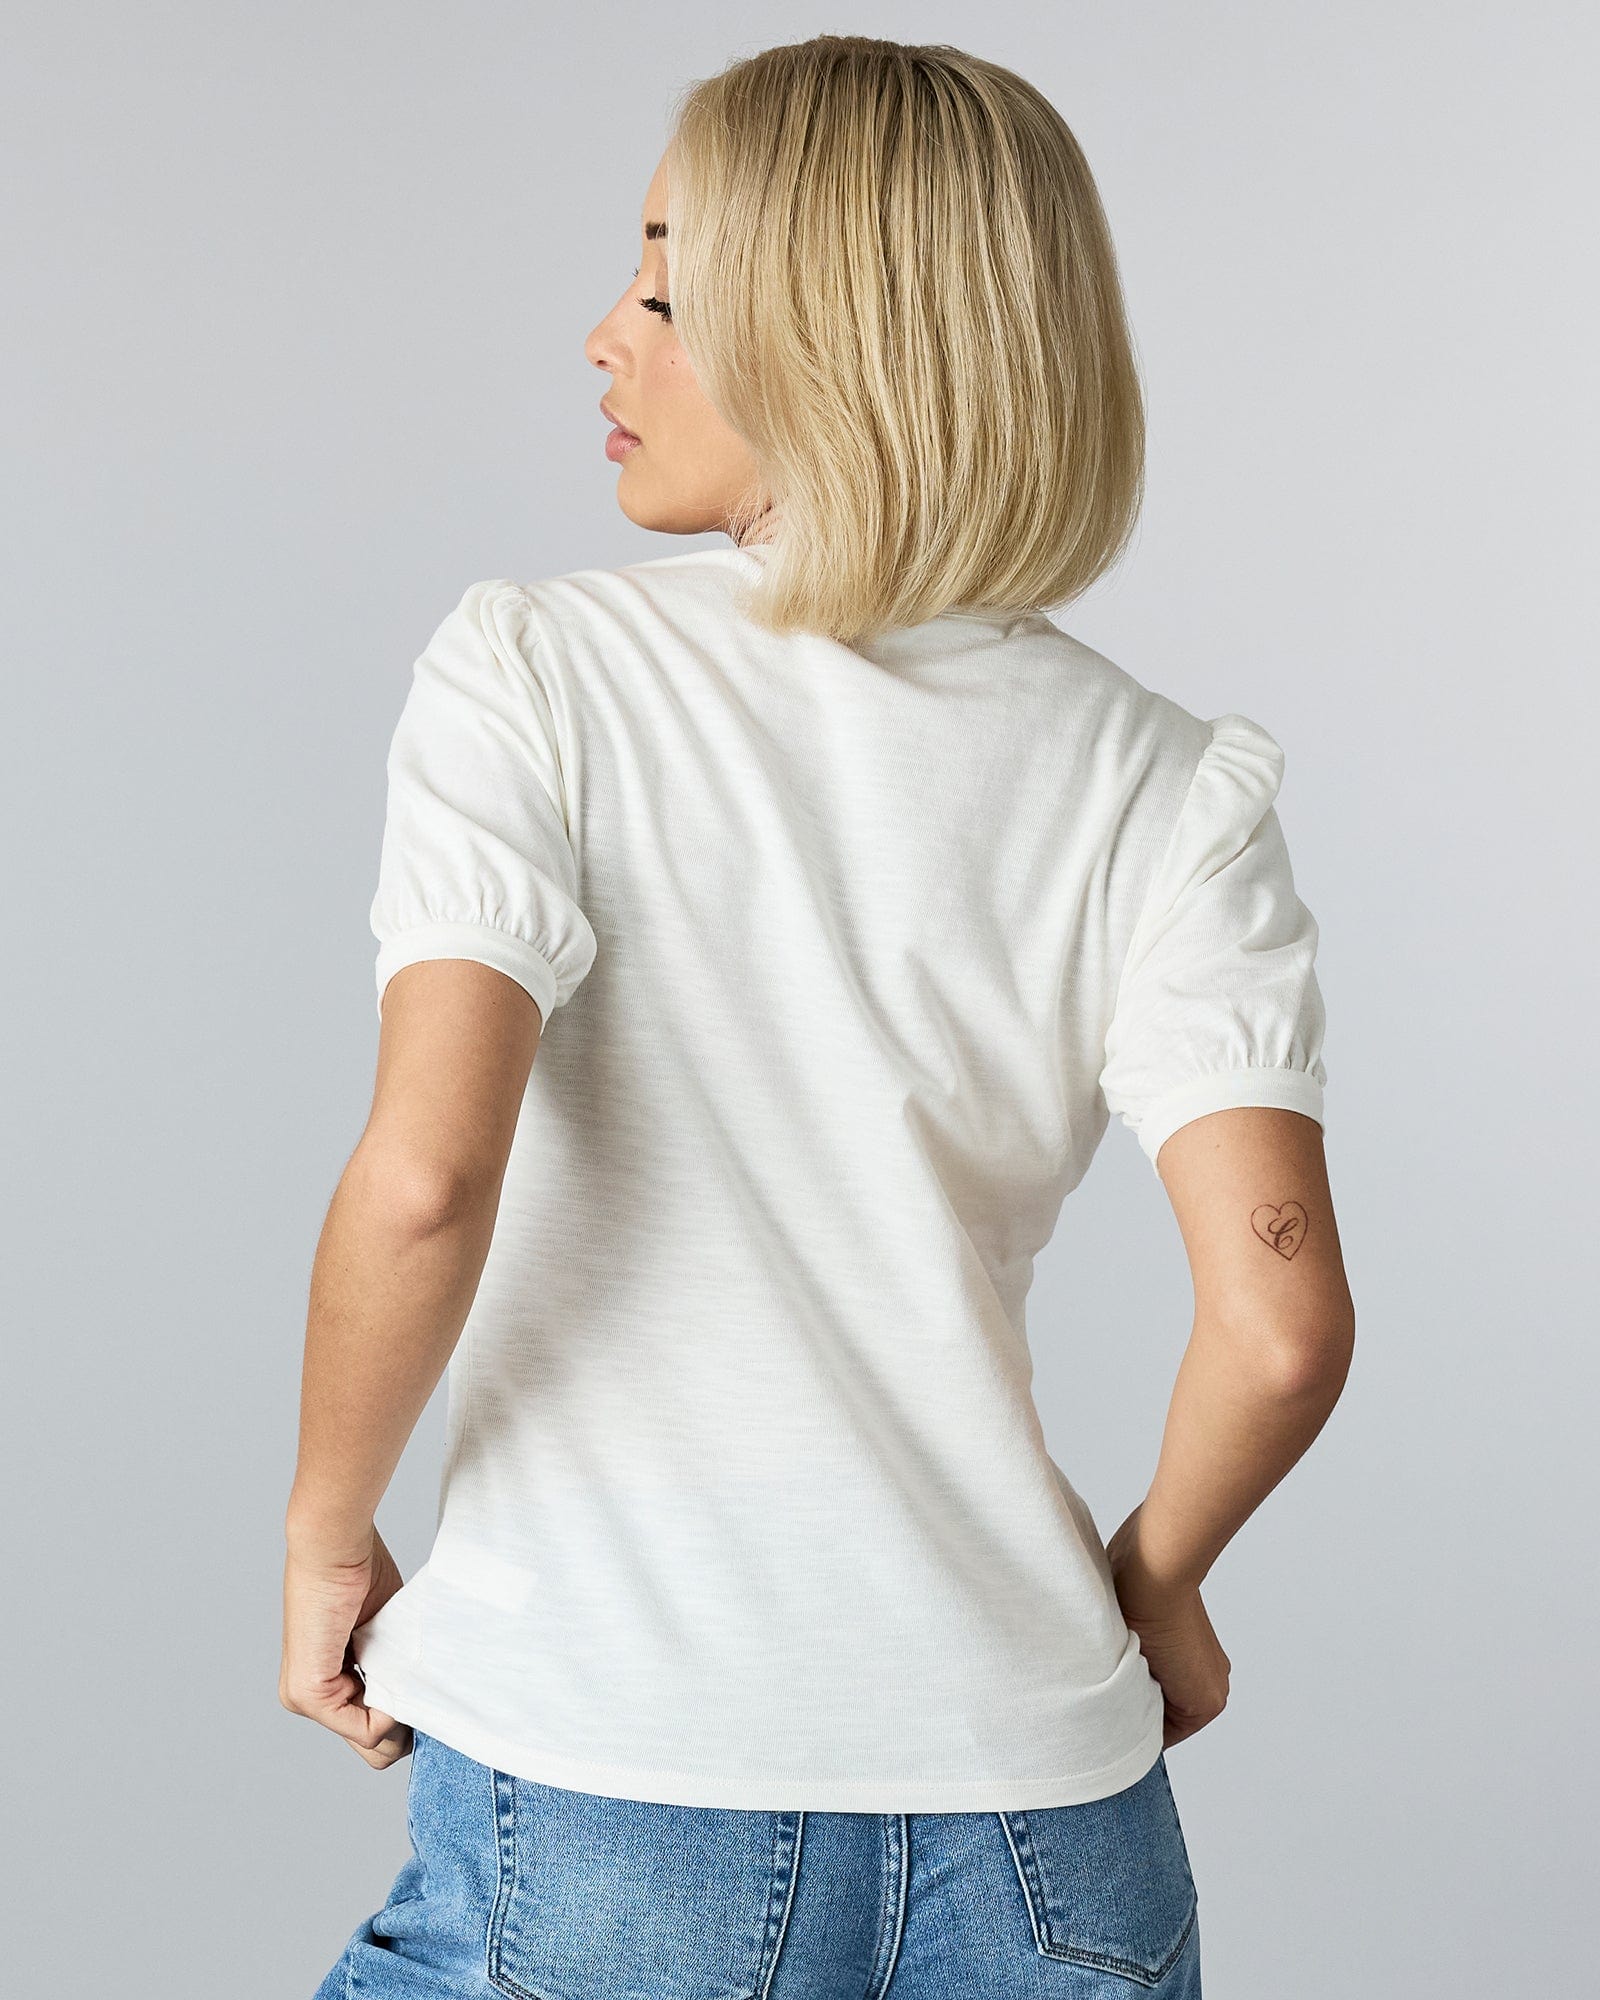 Woman in a short sleeved t-shirt.